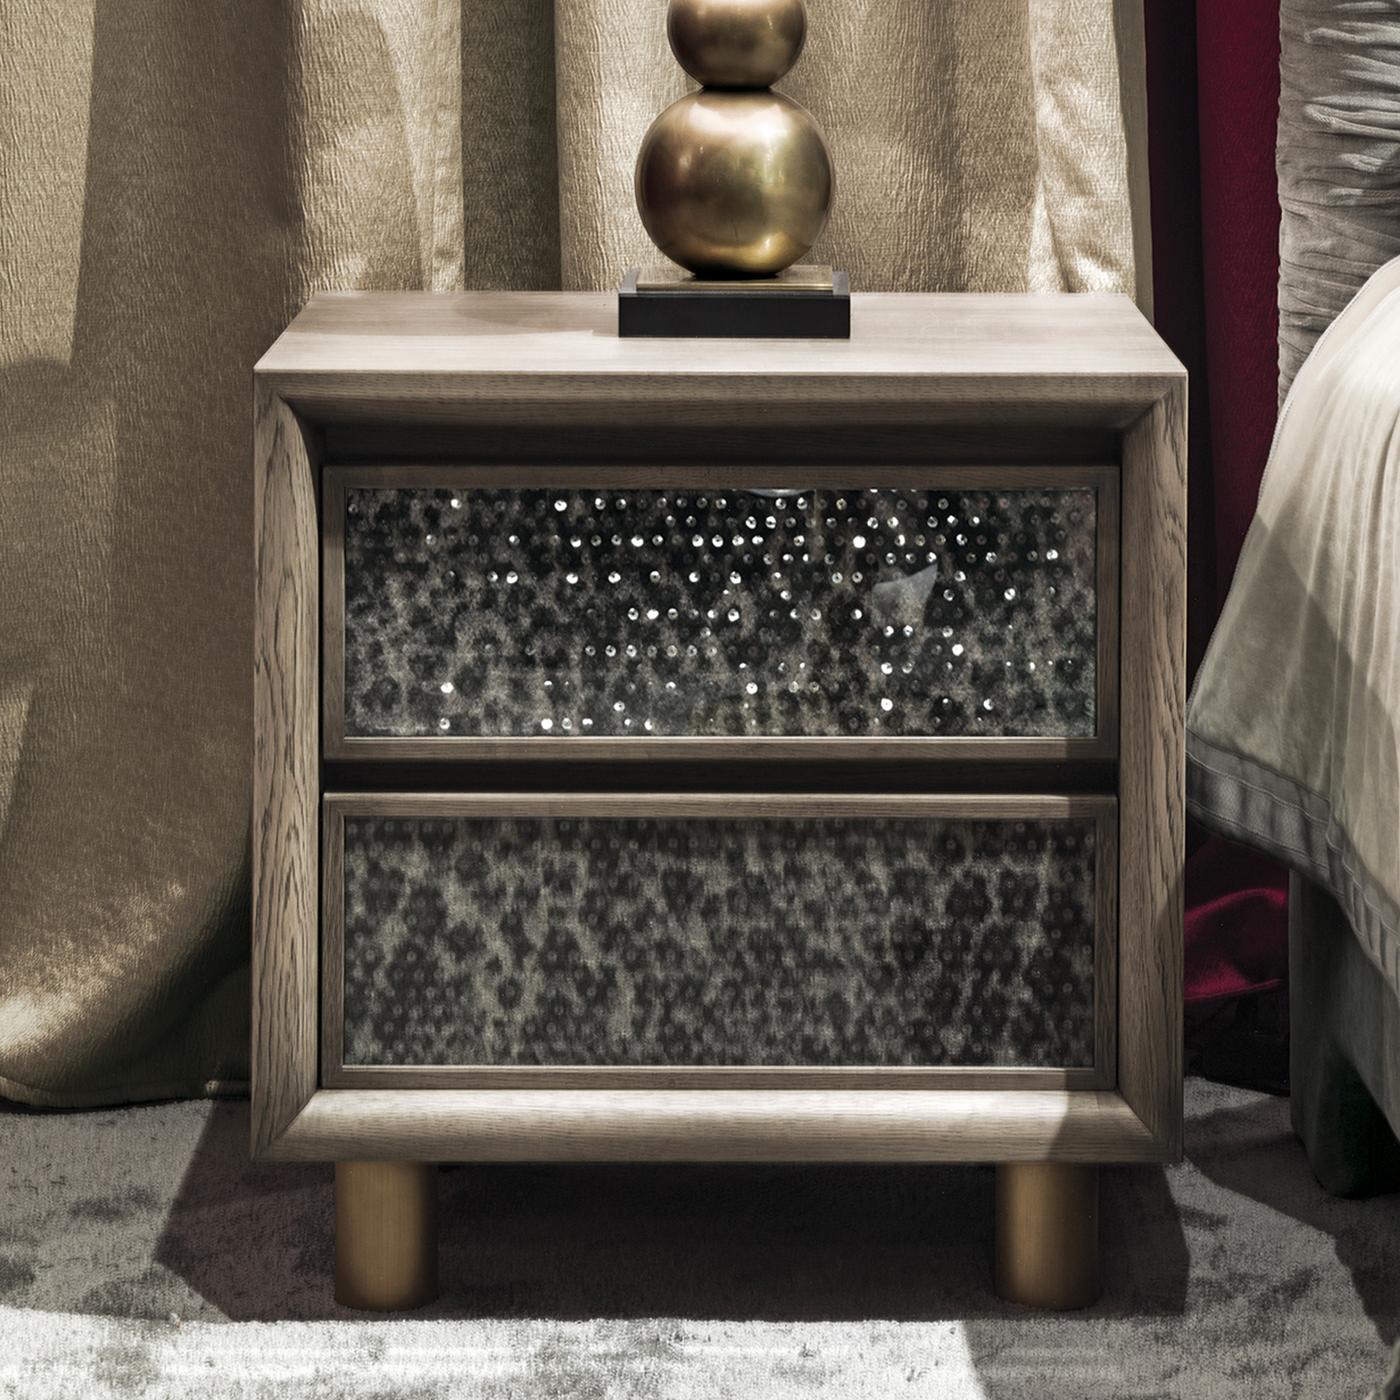 The Roger Safari nightstand is part of Chiara Provasi's Couture Collection, dedicated to the ties between the worlds of fashion, art and furnishing. In solid oak with a gray finish, the nightstand is covered in animal-print wool and adorned with